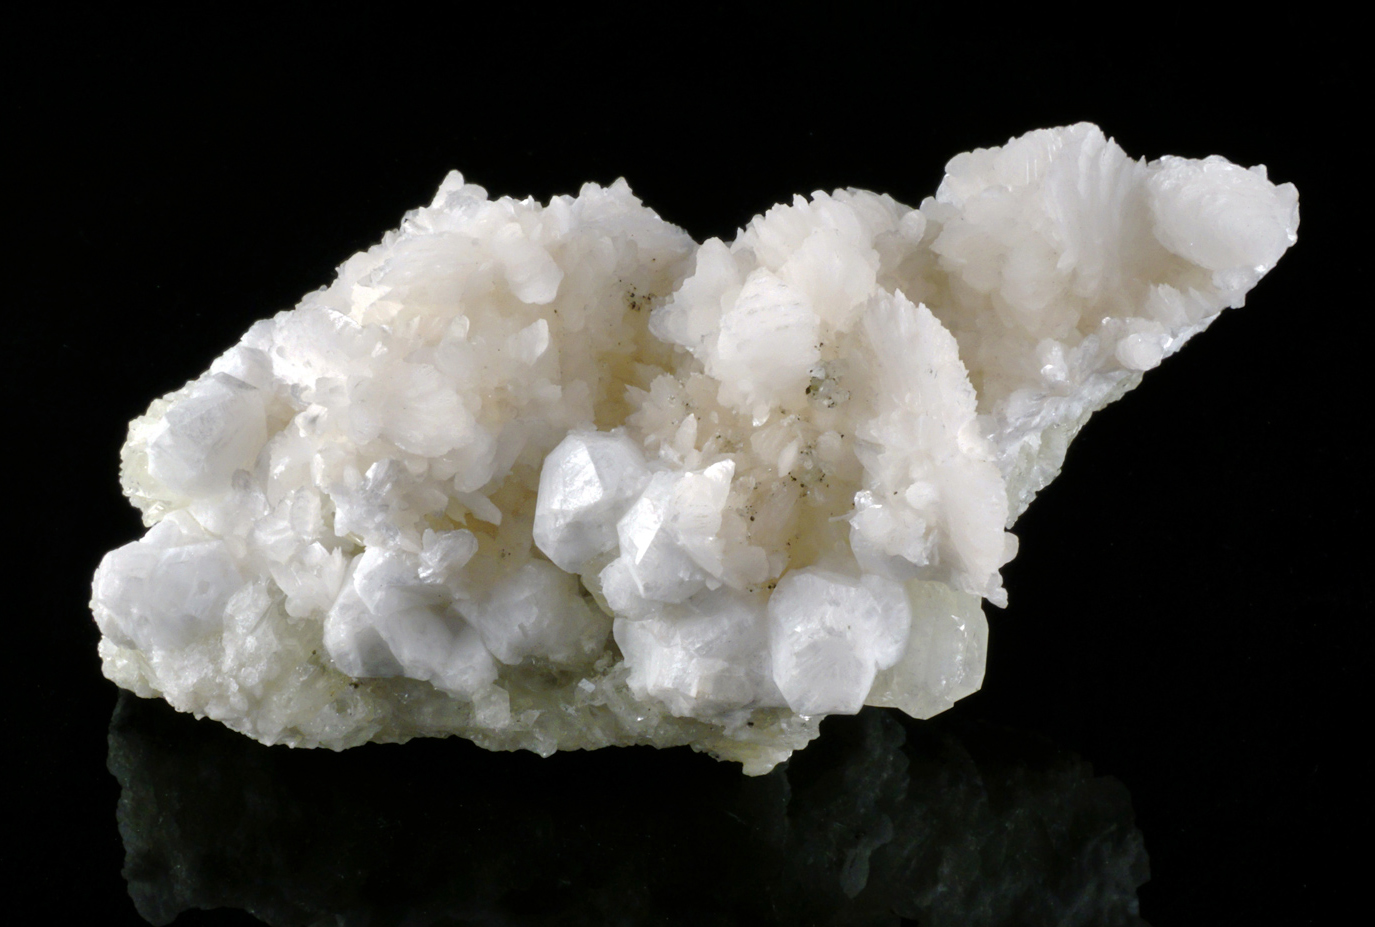 Thomsonite with Analcime from Prospect Park Quarry, Prospect Park, Passaic Co., New Jersey